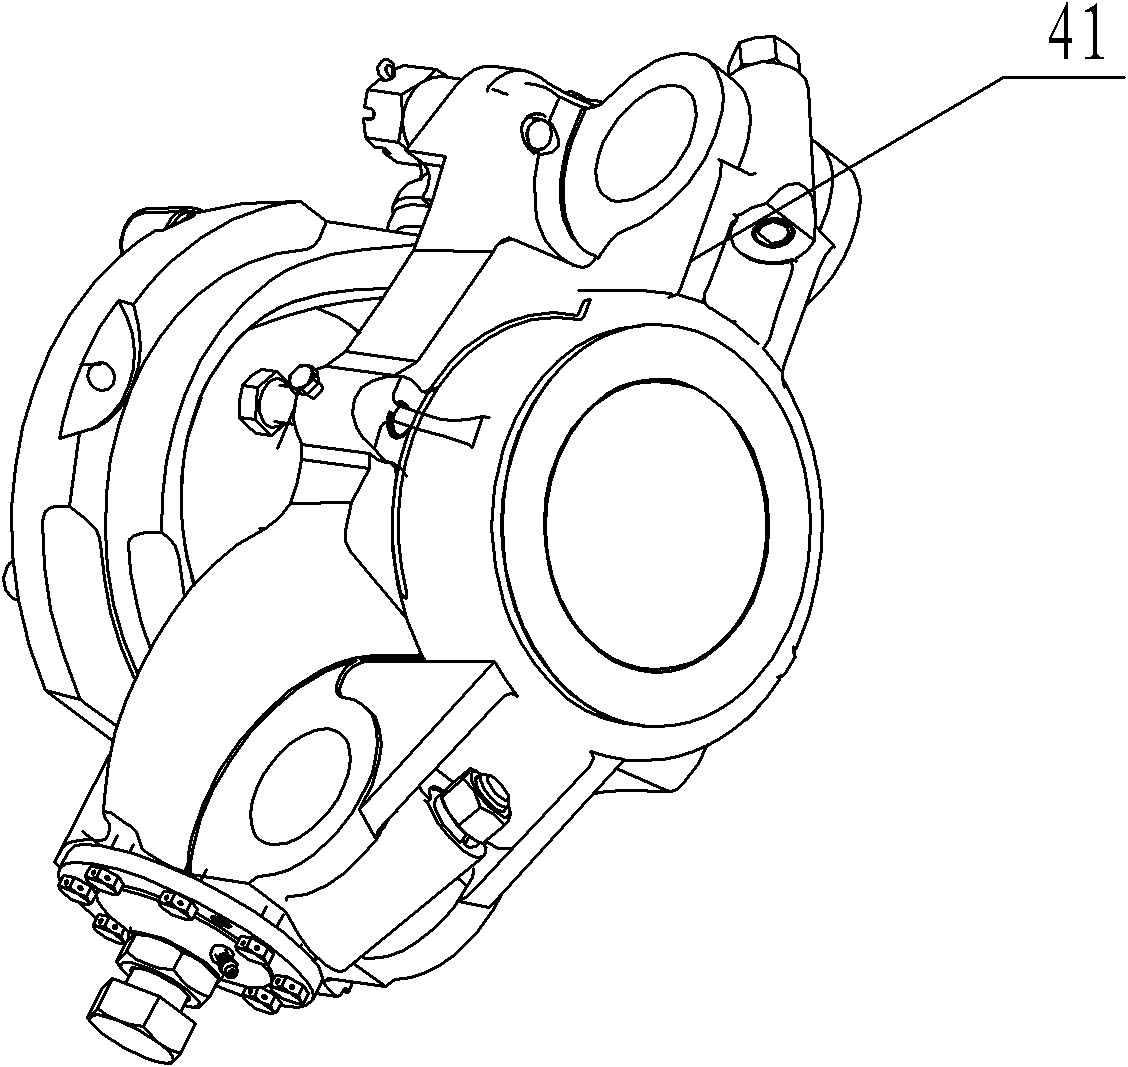 Novel front axle steering knuckle assembly device